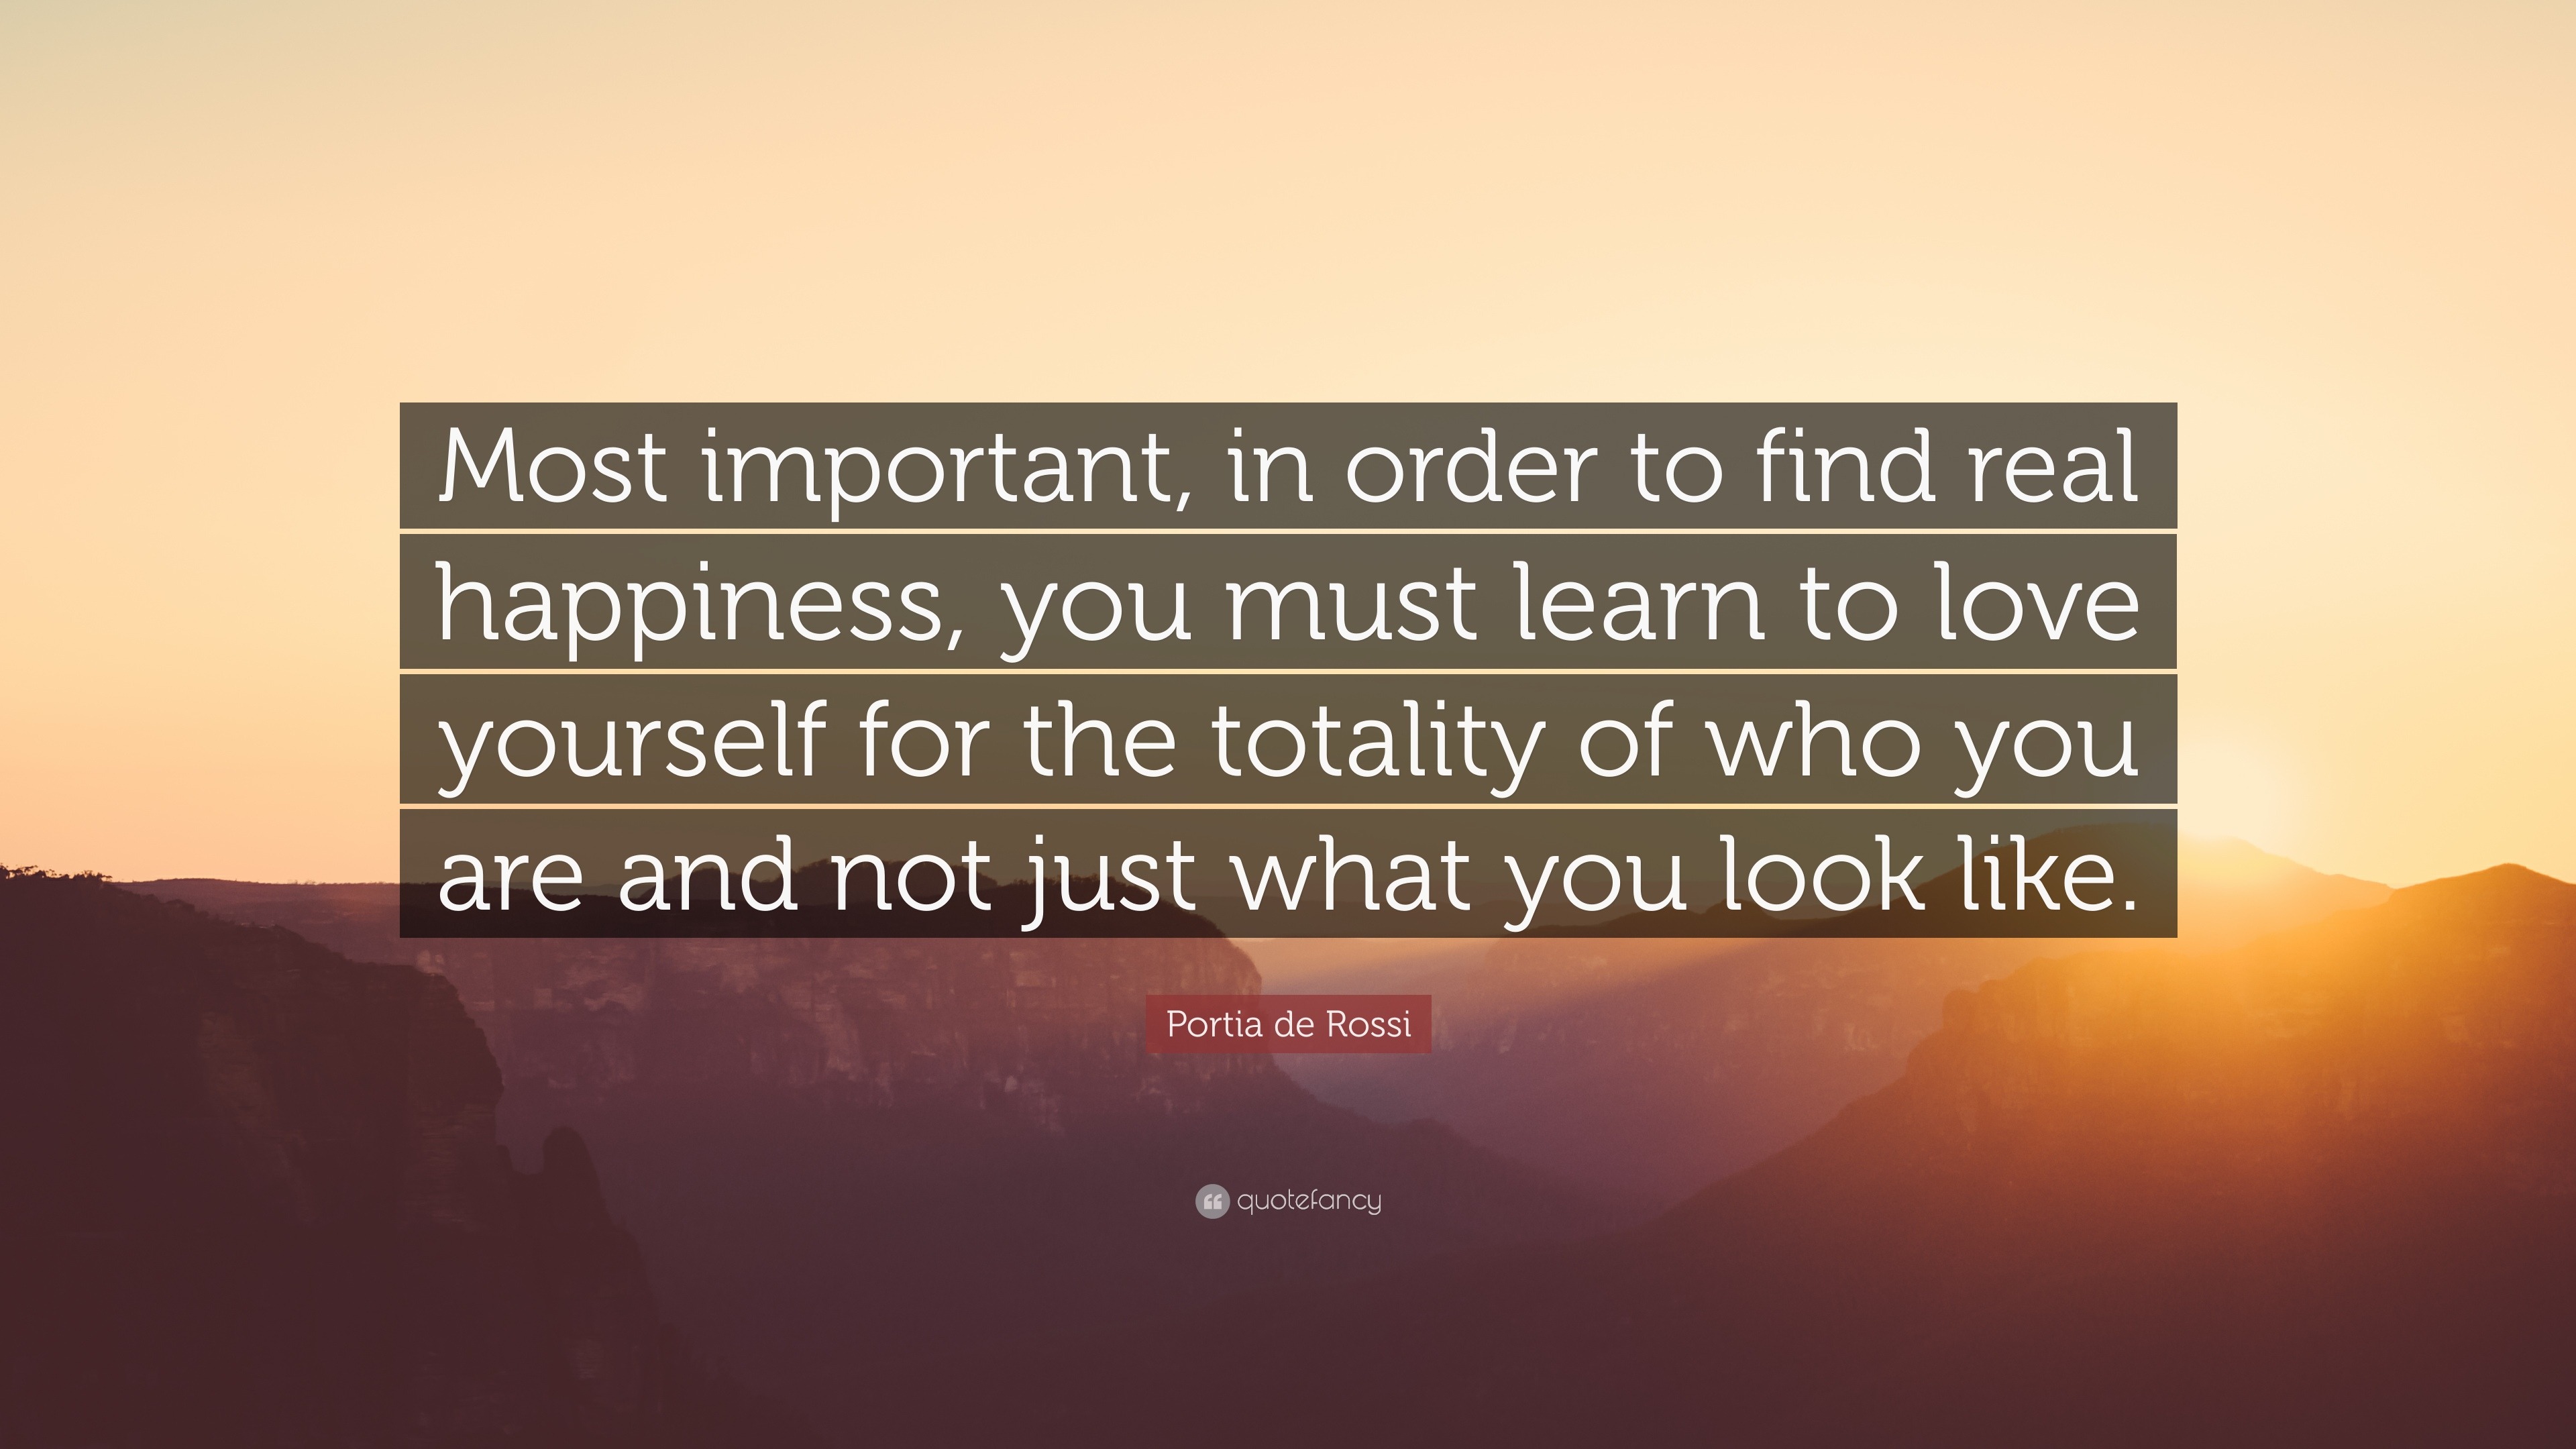 Portia de Rossi Quote: “Most important, in order to find real happiness ...